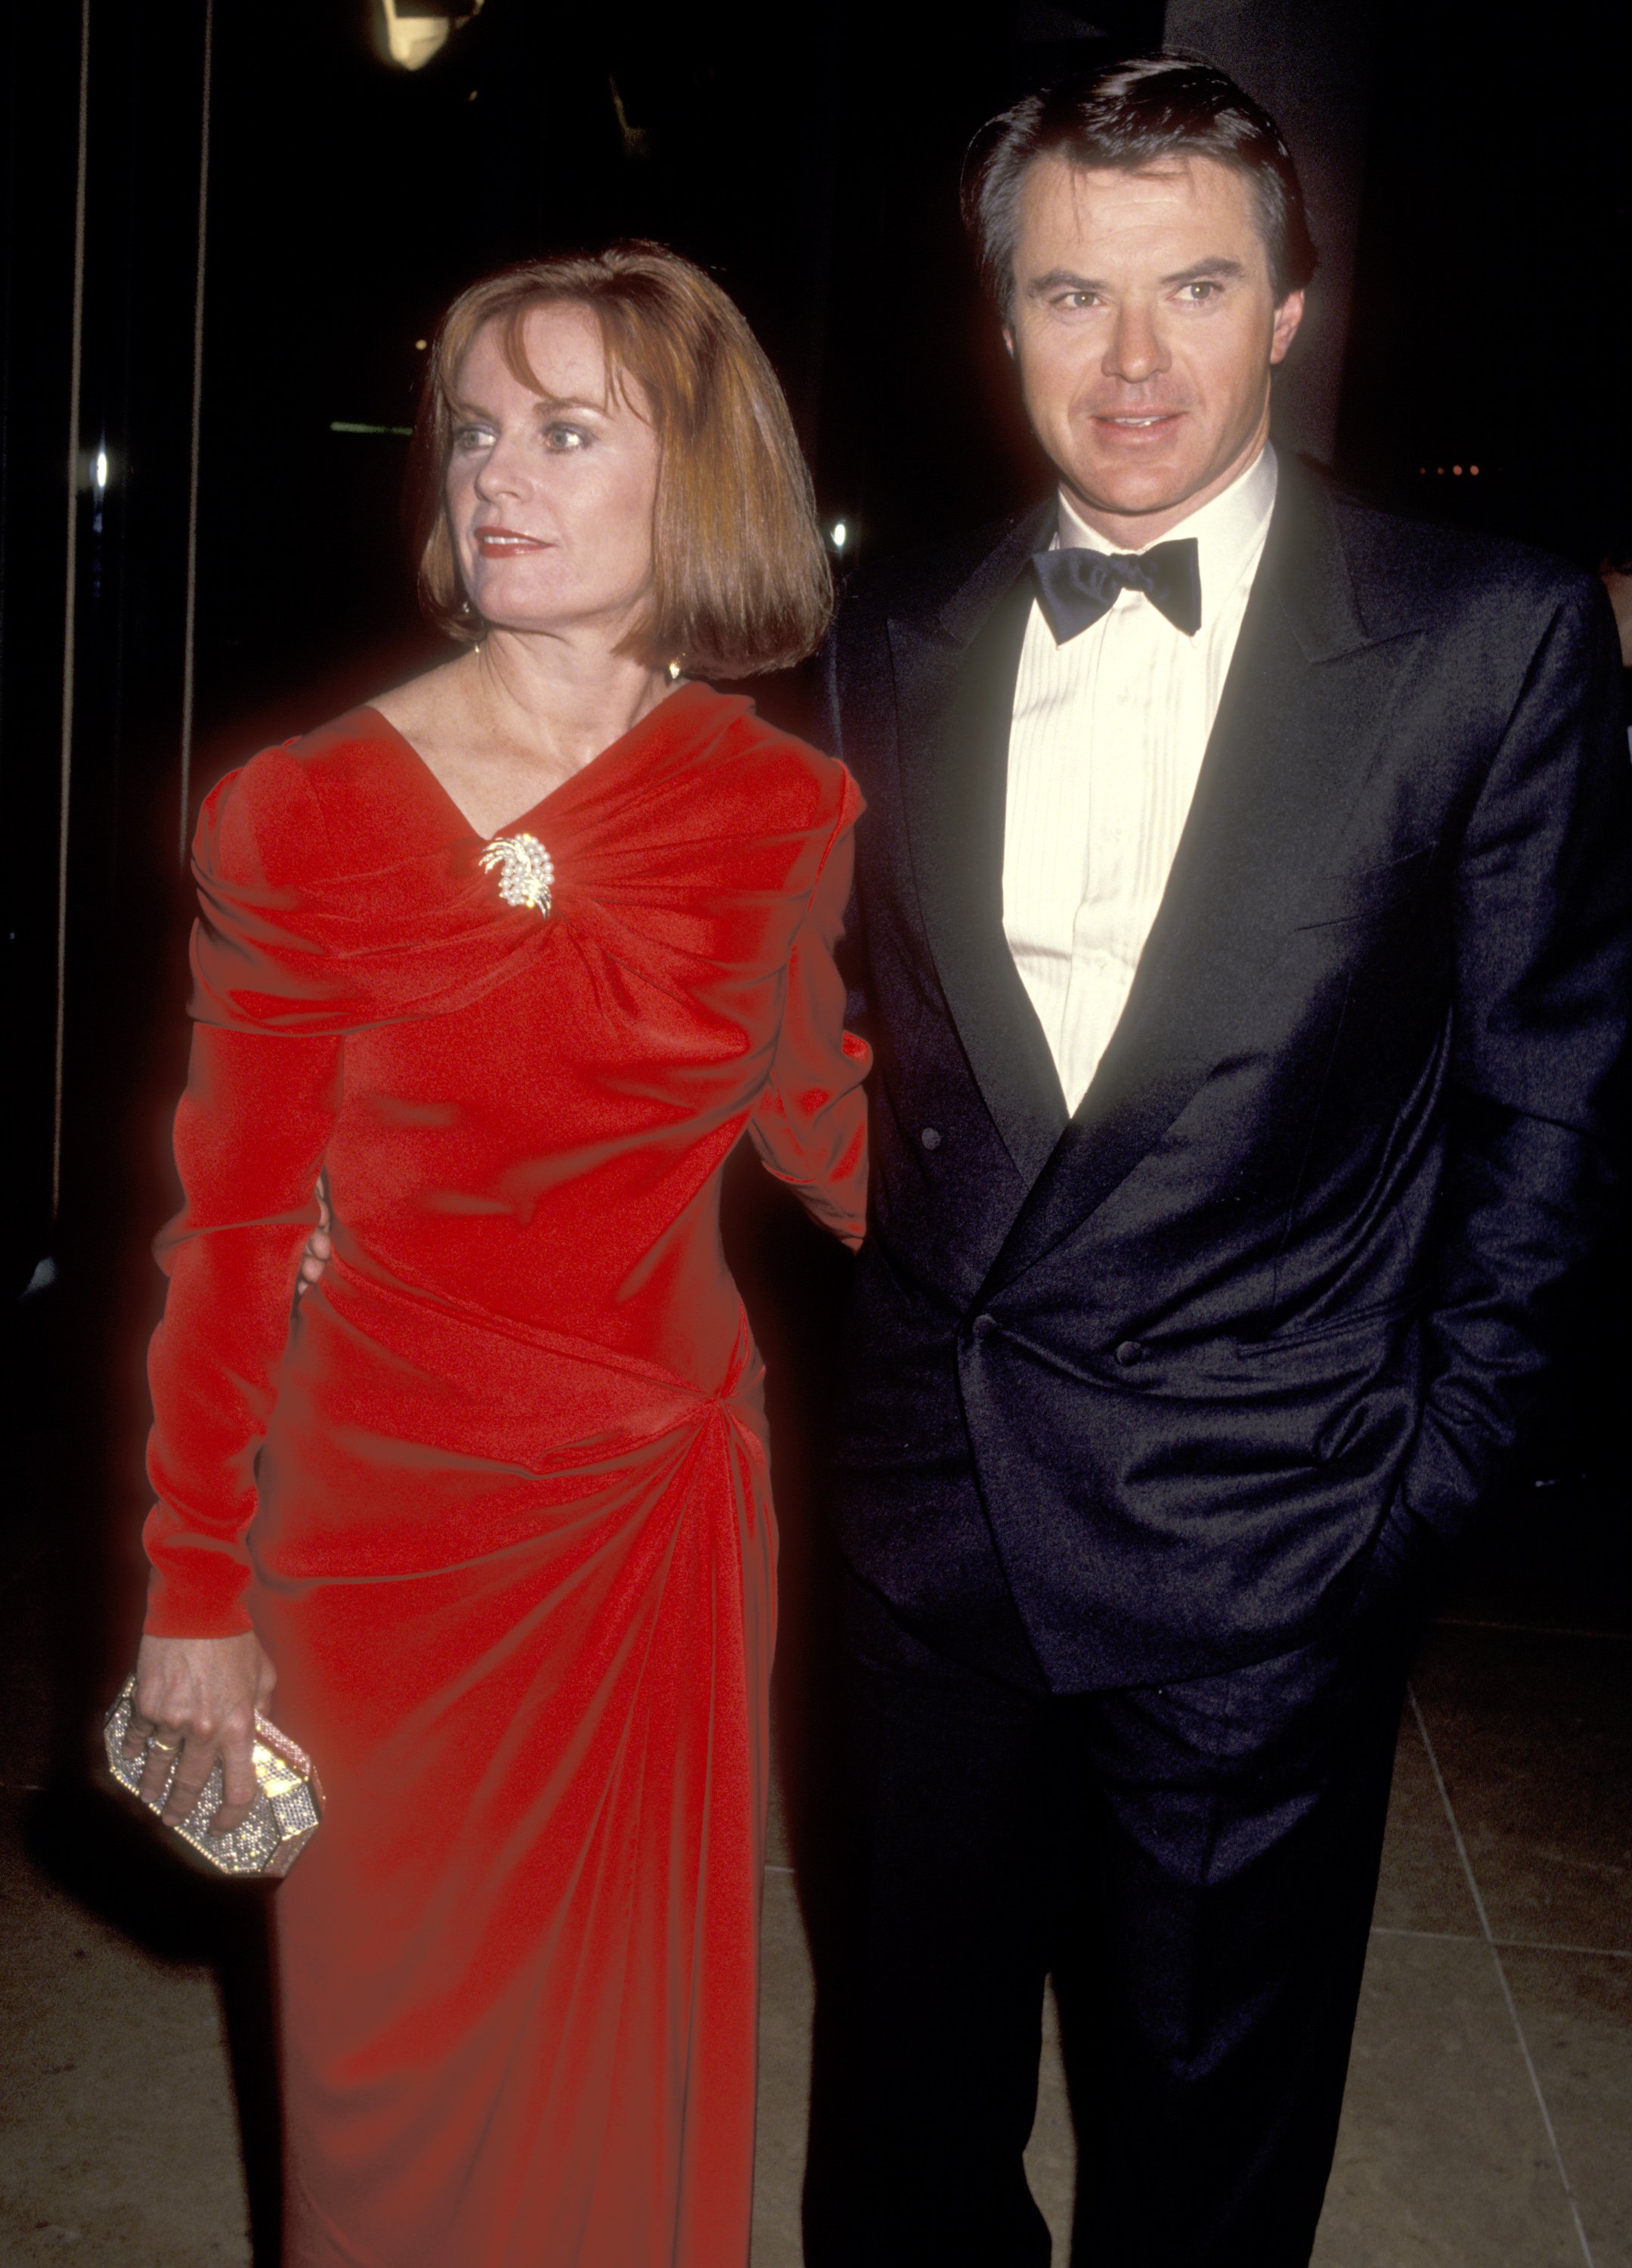 Actor Robert Urich and his wife Heather Menzies attend the 48th Annual Golden Globe Awards 1991 held at the Beverly Hilton Hotel in Beverly Hills, CA.  |  Source: Getty Images